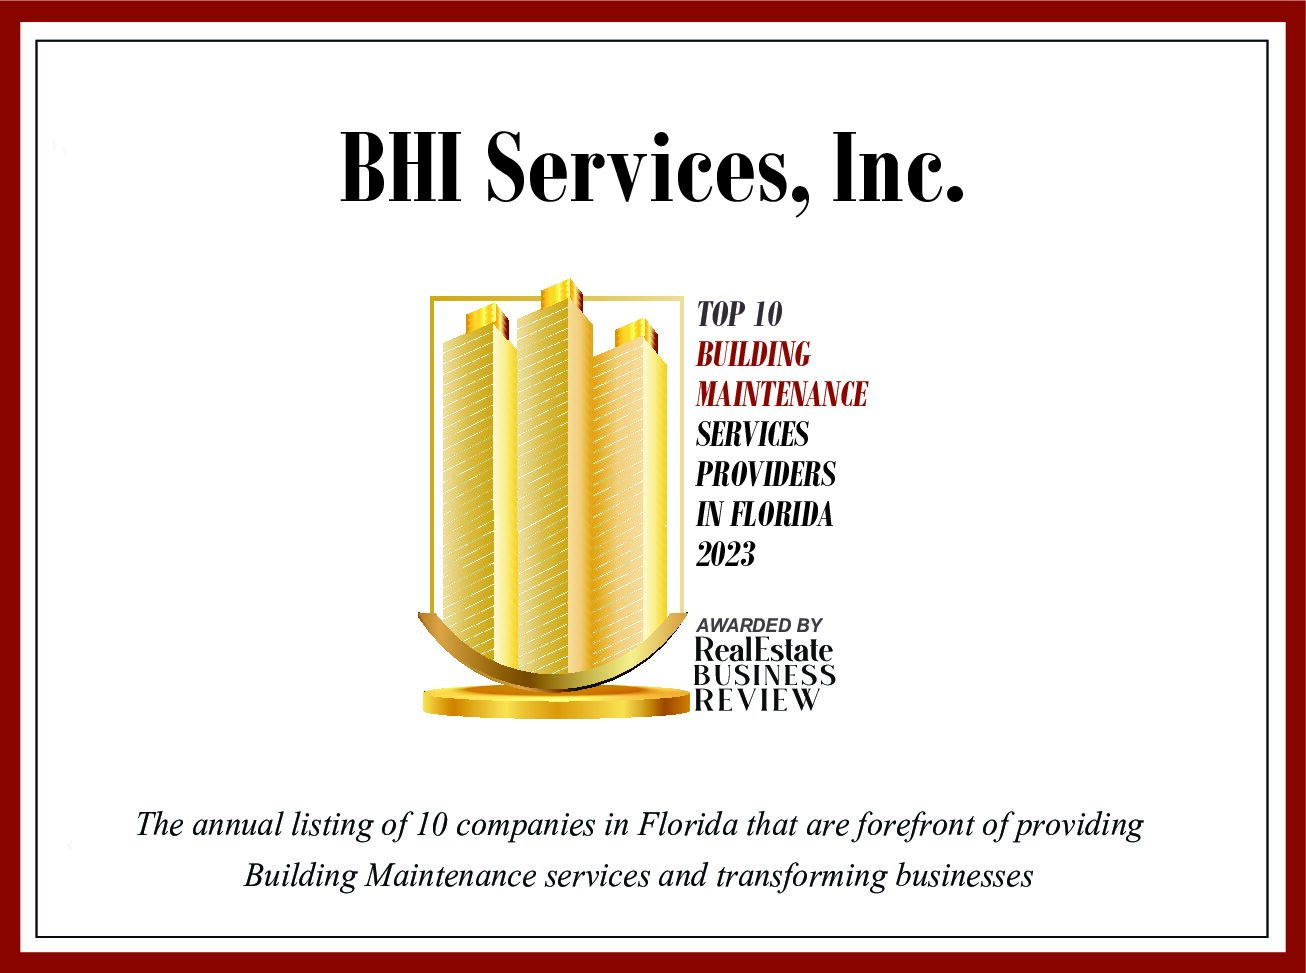 BHI Services, Inc Named Top Building Maintenance Service Provider In Florida 2023